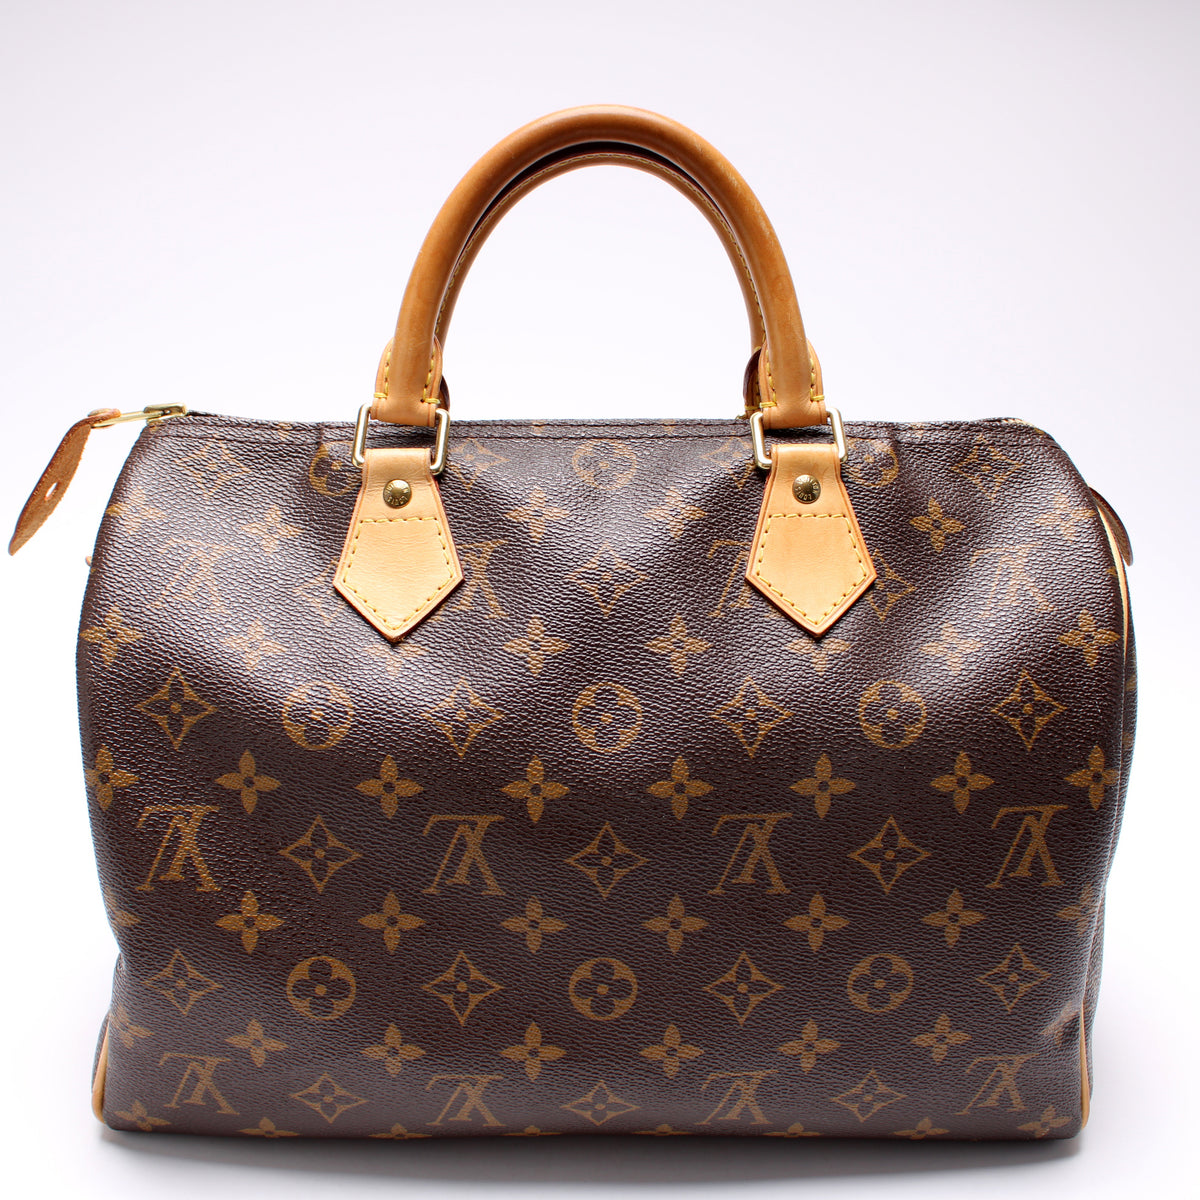 Louis Vuitton Trunks and Bags for $510 for sale from a Seller on